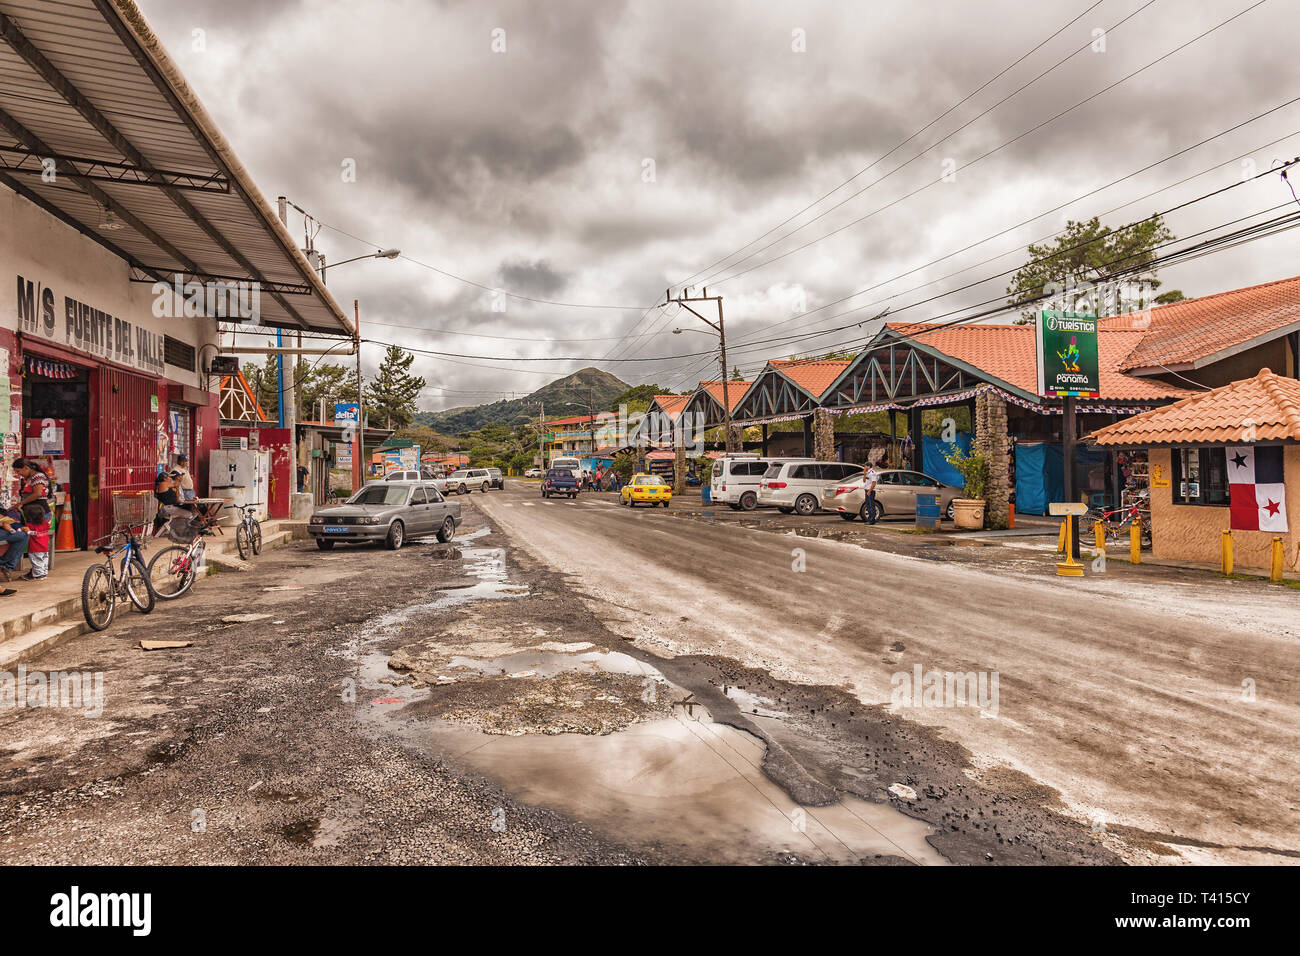 El Valle de Anton, Panama - November 24, 2016: The main street with the small market hall in El Valle de Anton a small town in the province of Panama. Stock Photo